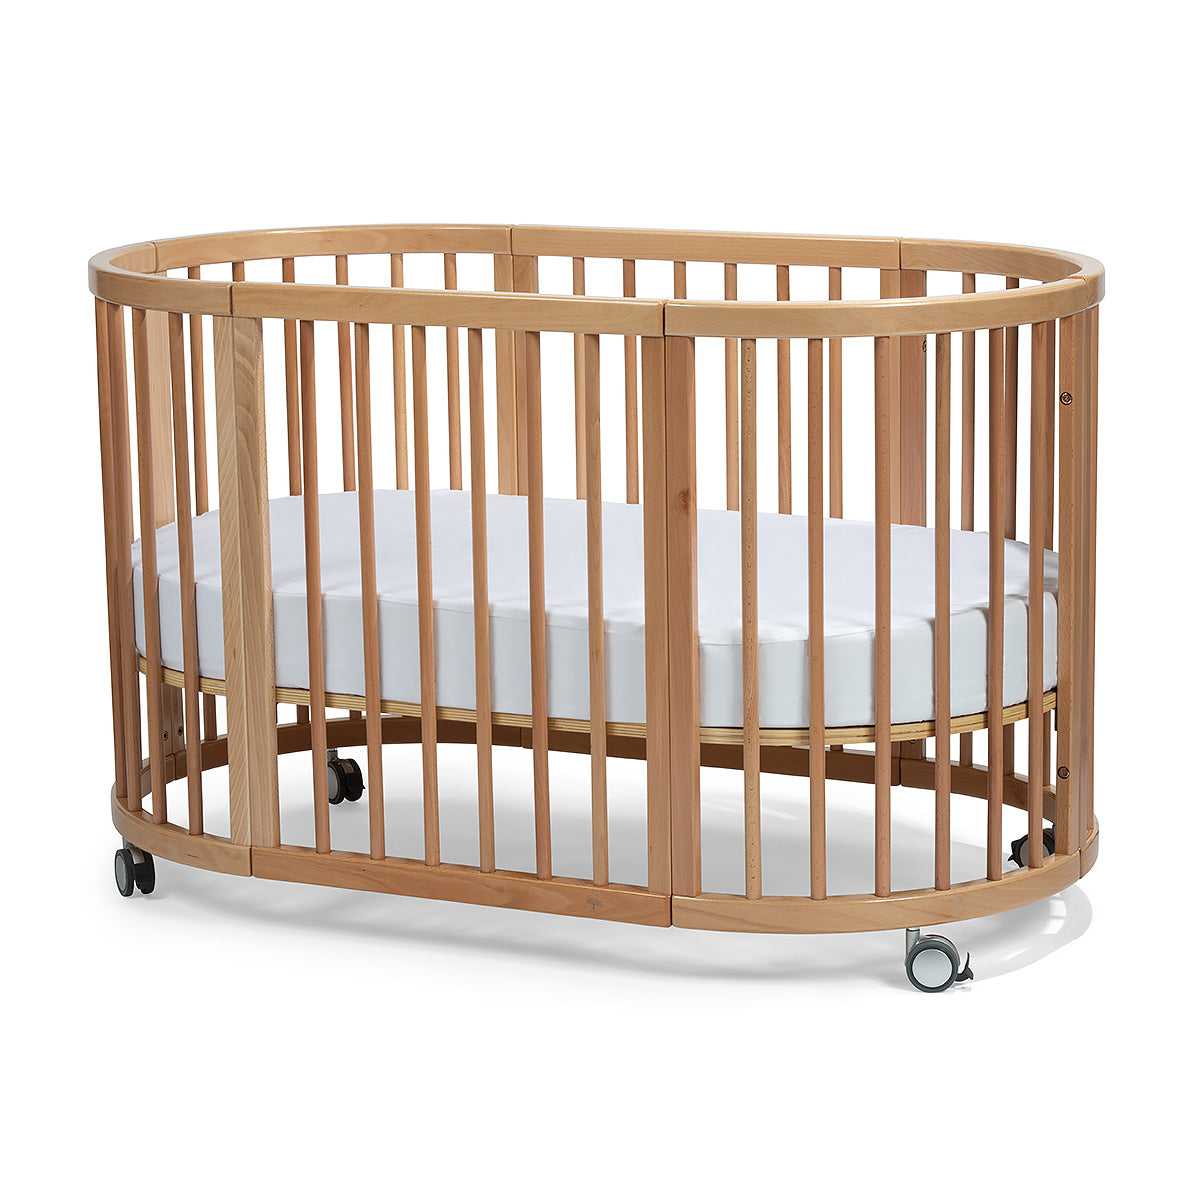 Lolli Sprout Cot 4 in 1 Natural with Mattress